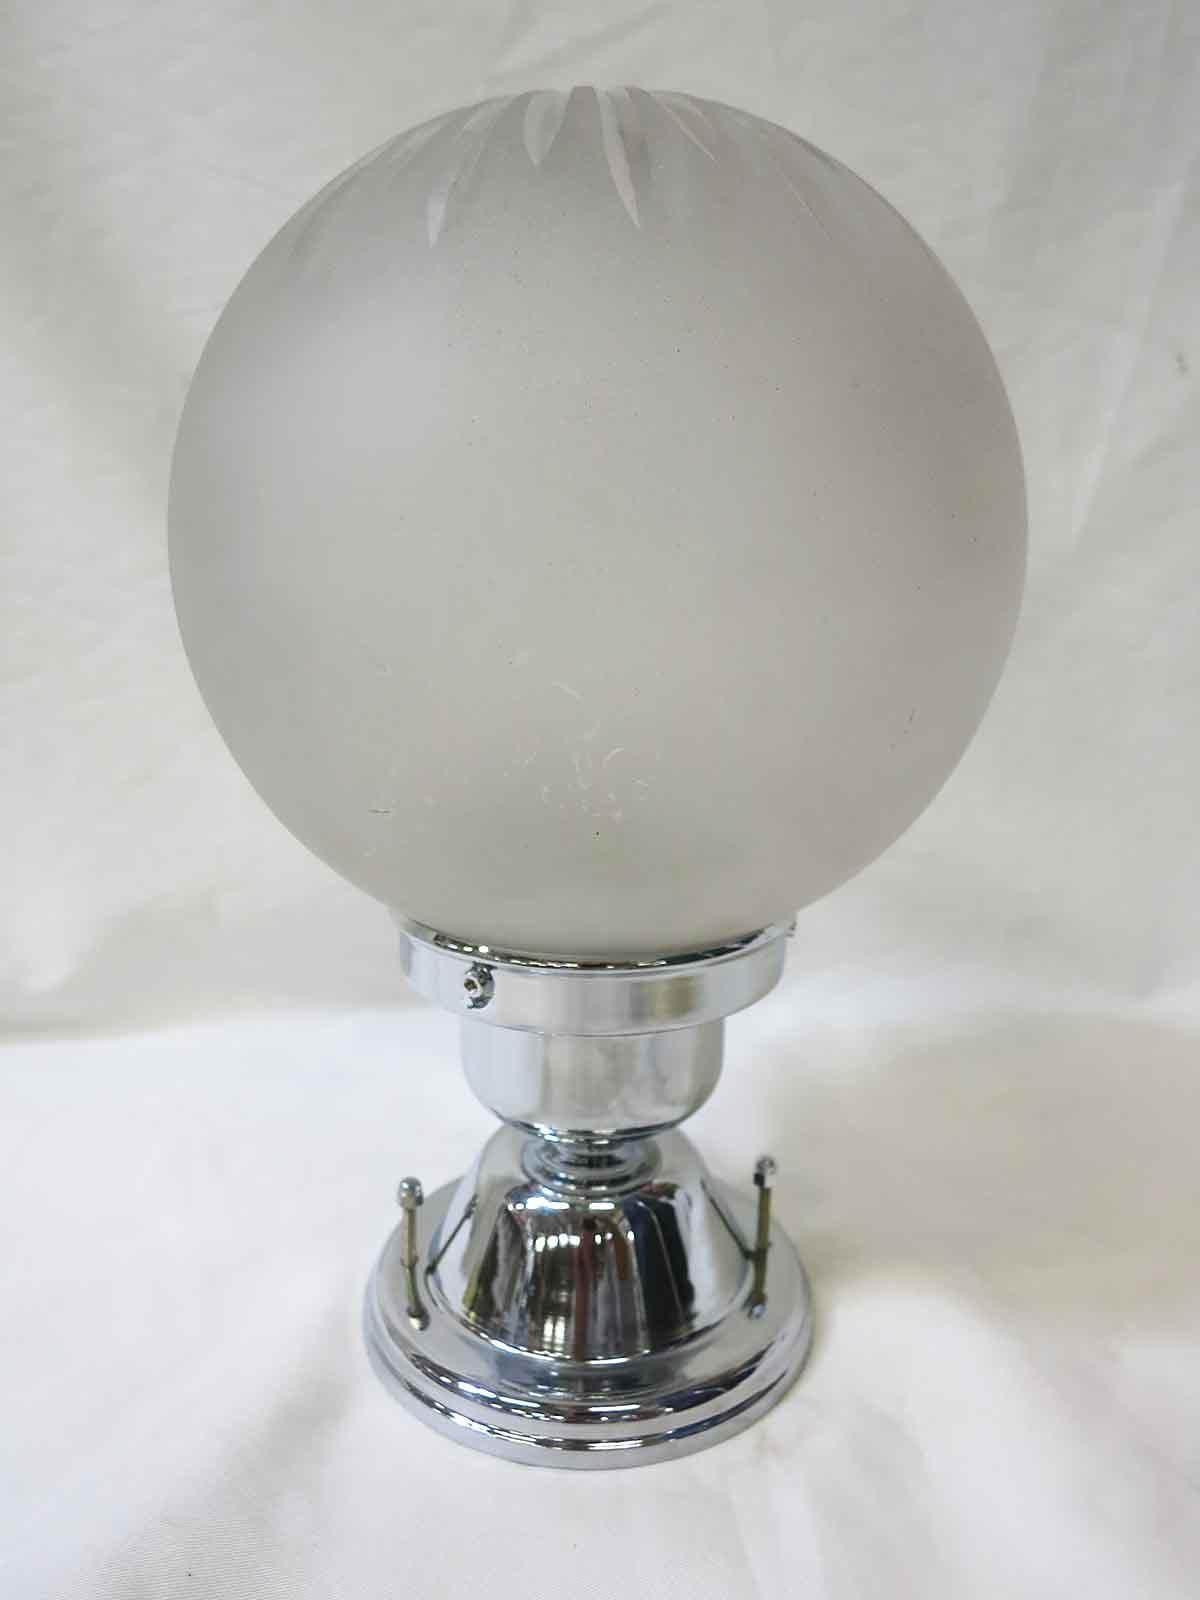 20th Century Art Deco Cut Crystal Frosted Sphere Ceiling Glass Globe Pendant